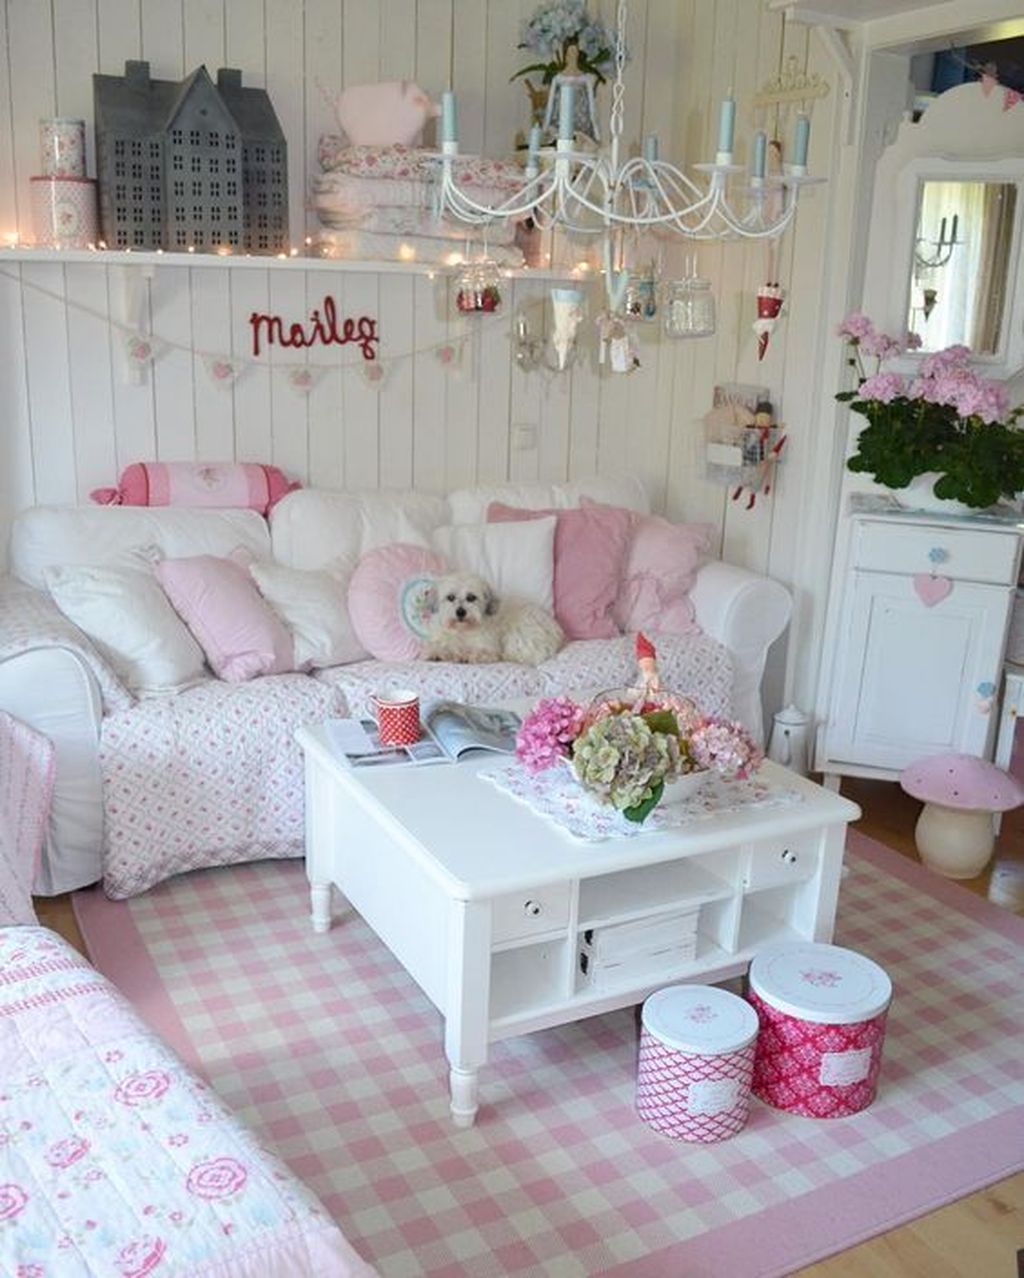 20+ Cute And Chic Living Room Design For Your Home -   14 shabby chic salon
 ideas